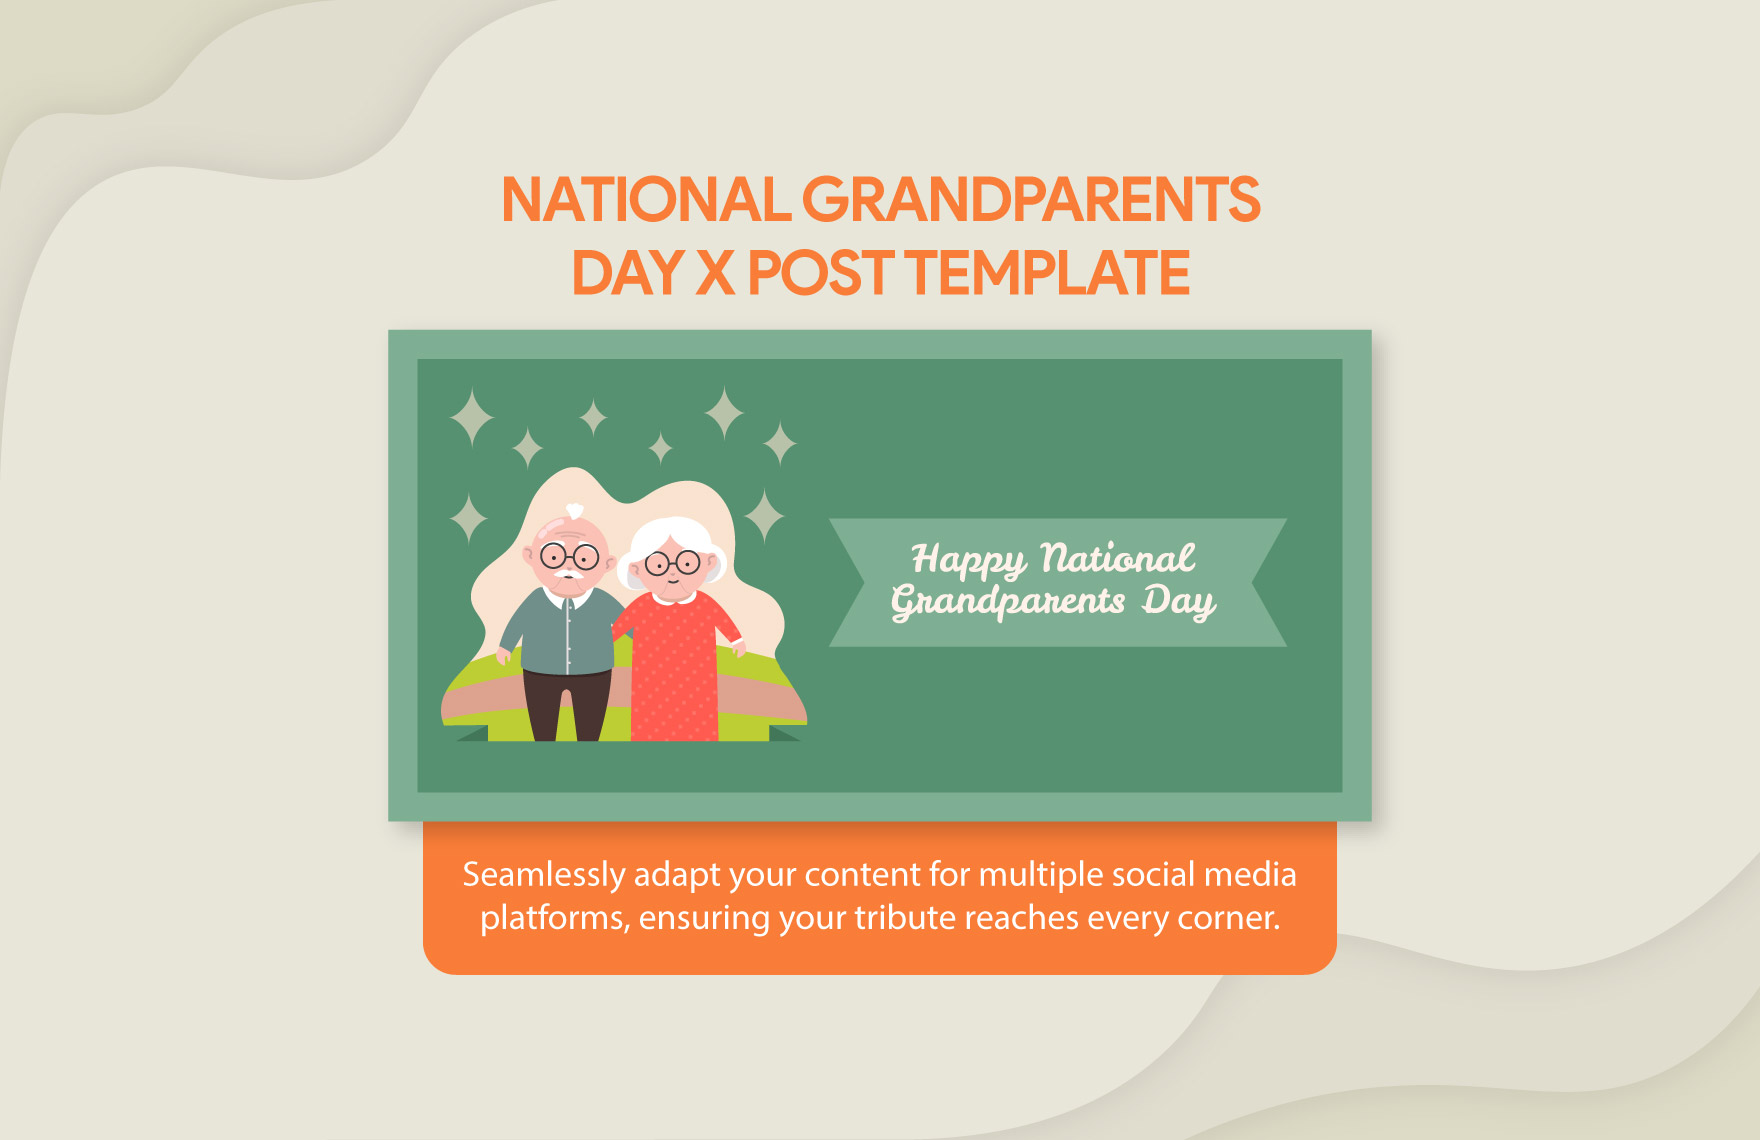 National Grandparents Day X Post Template